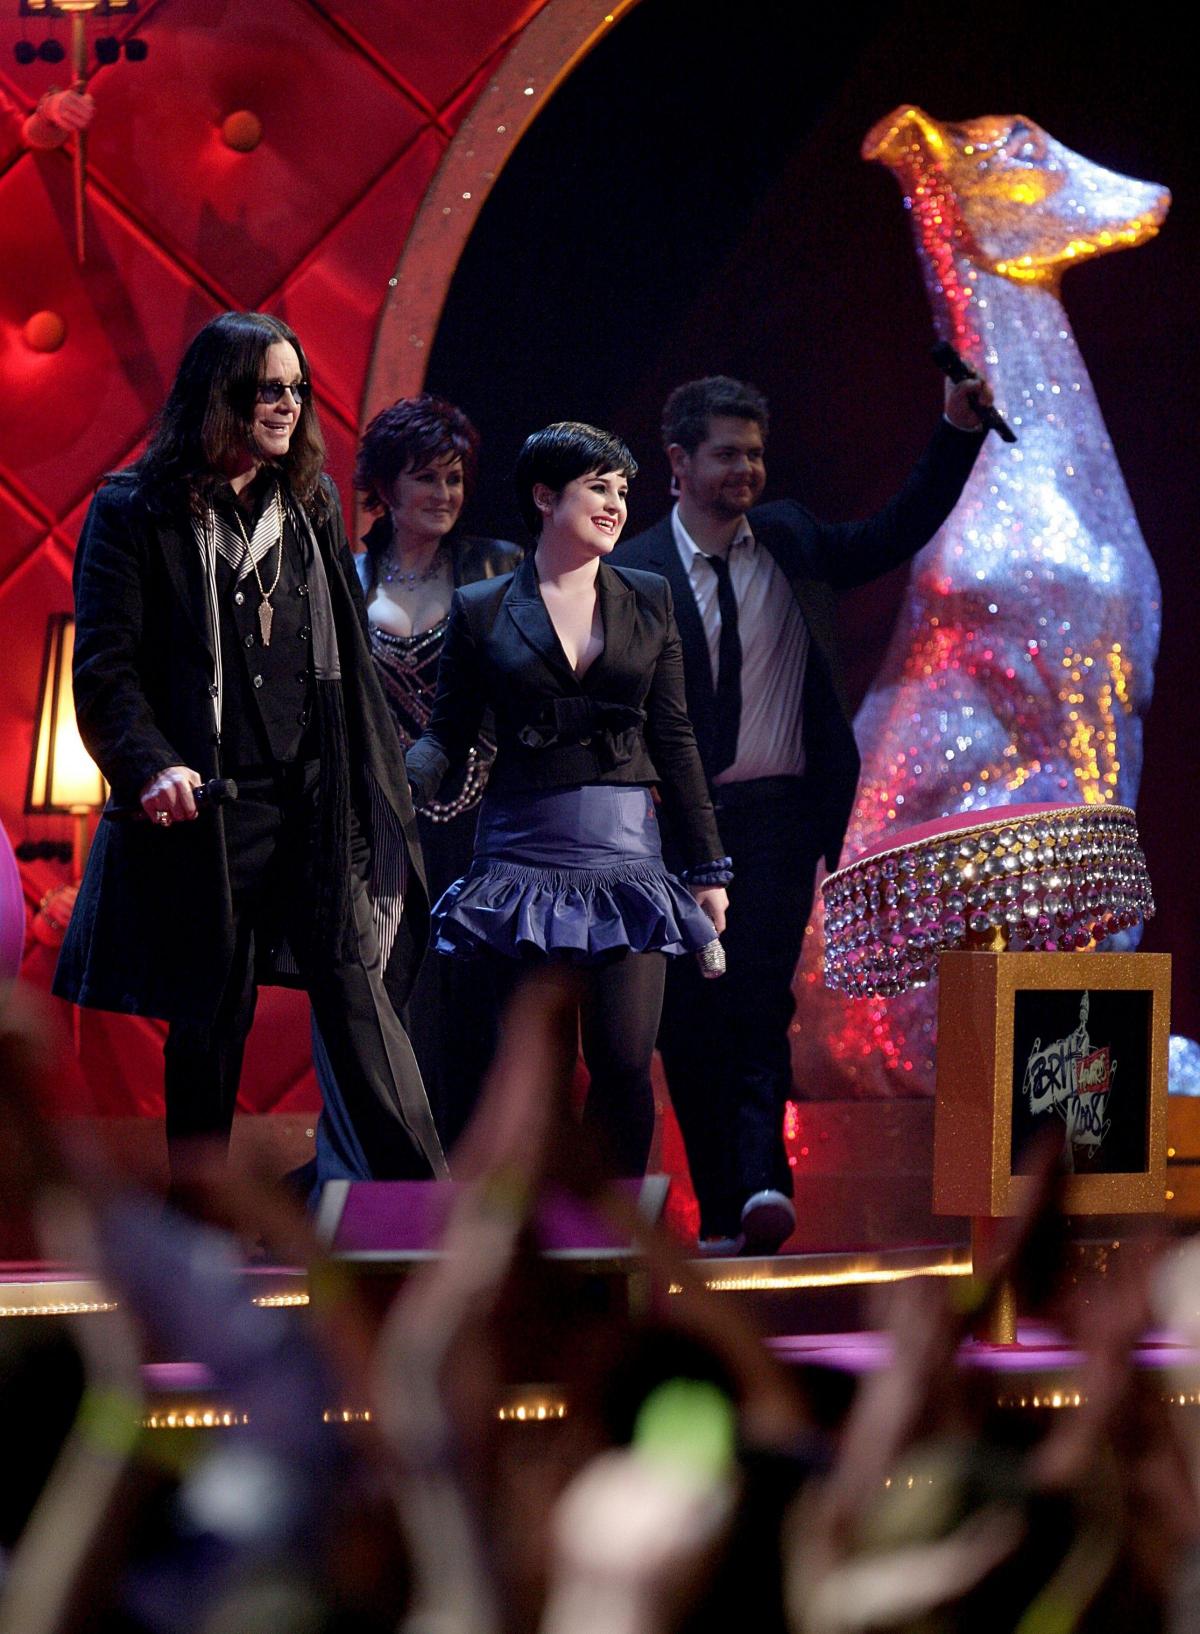 xxx-factor: Ozzy, Sharon, Kelly and Jack Osbourne on stage during the Brit Awards 2008 at which Sharon Osbourne shouted at Vic Reeves ''Shut up, you're pissed, piss off, you bastard''...